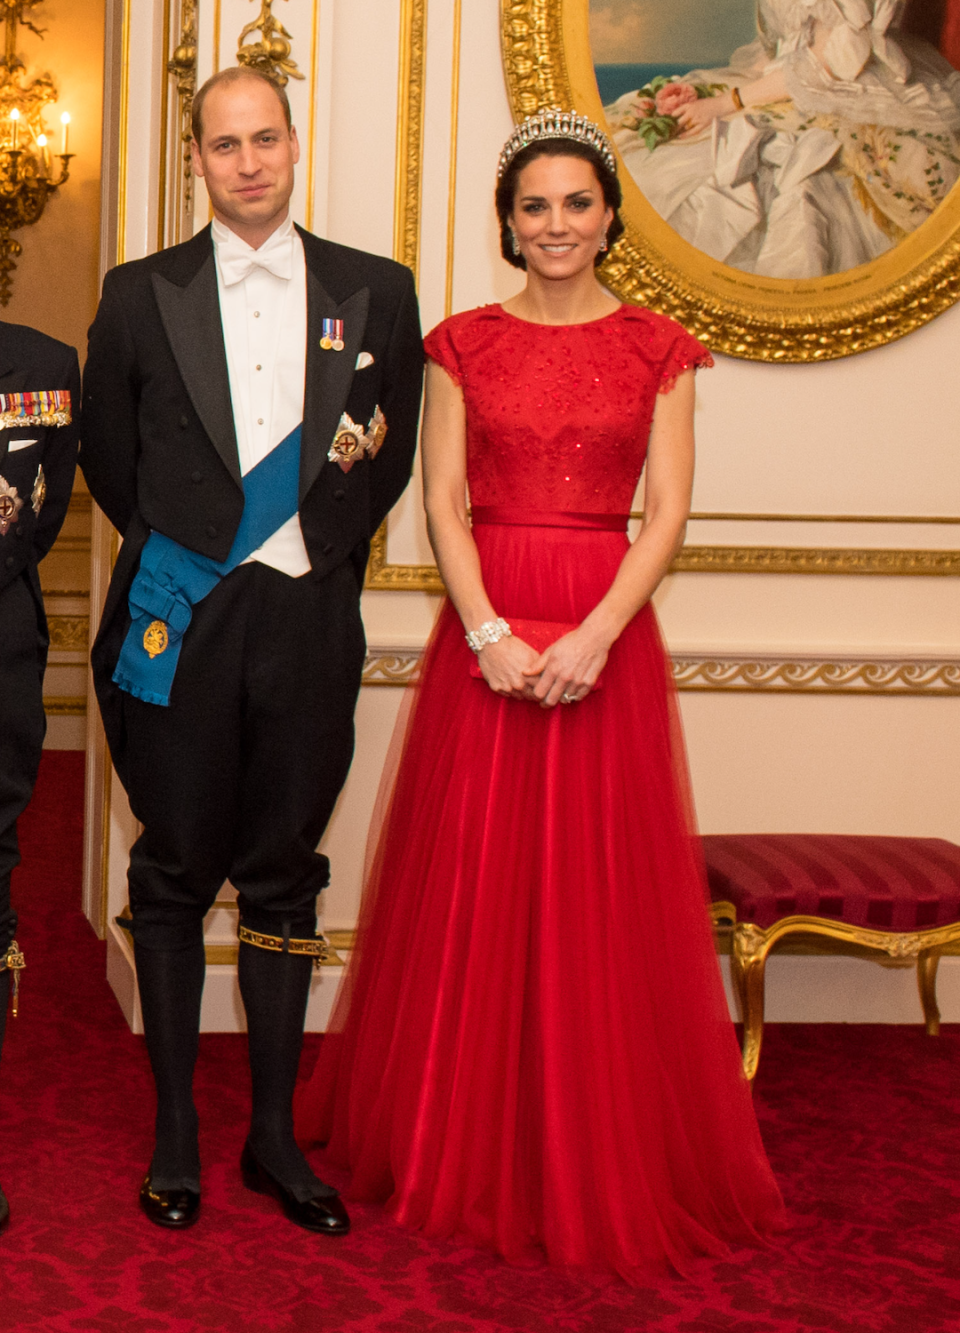 The duchess and the Lover's Knot Tiara in 2016